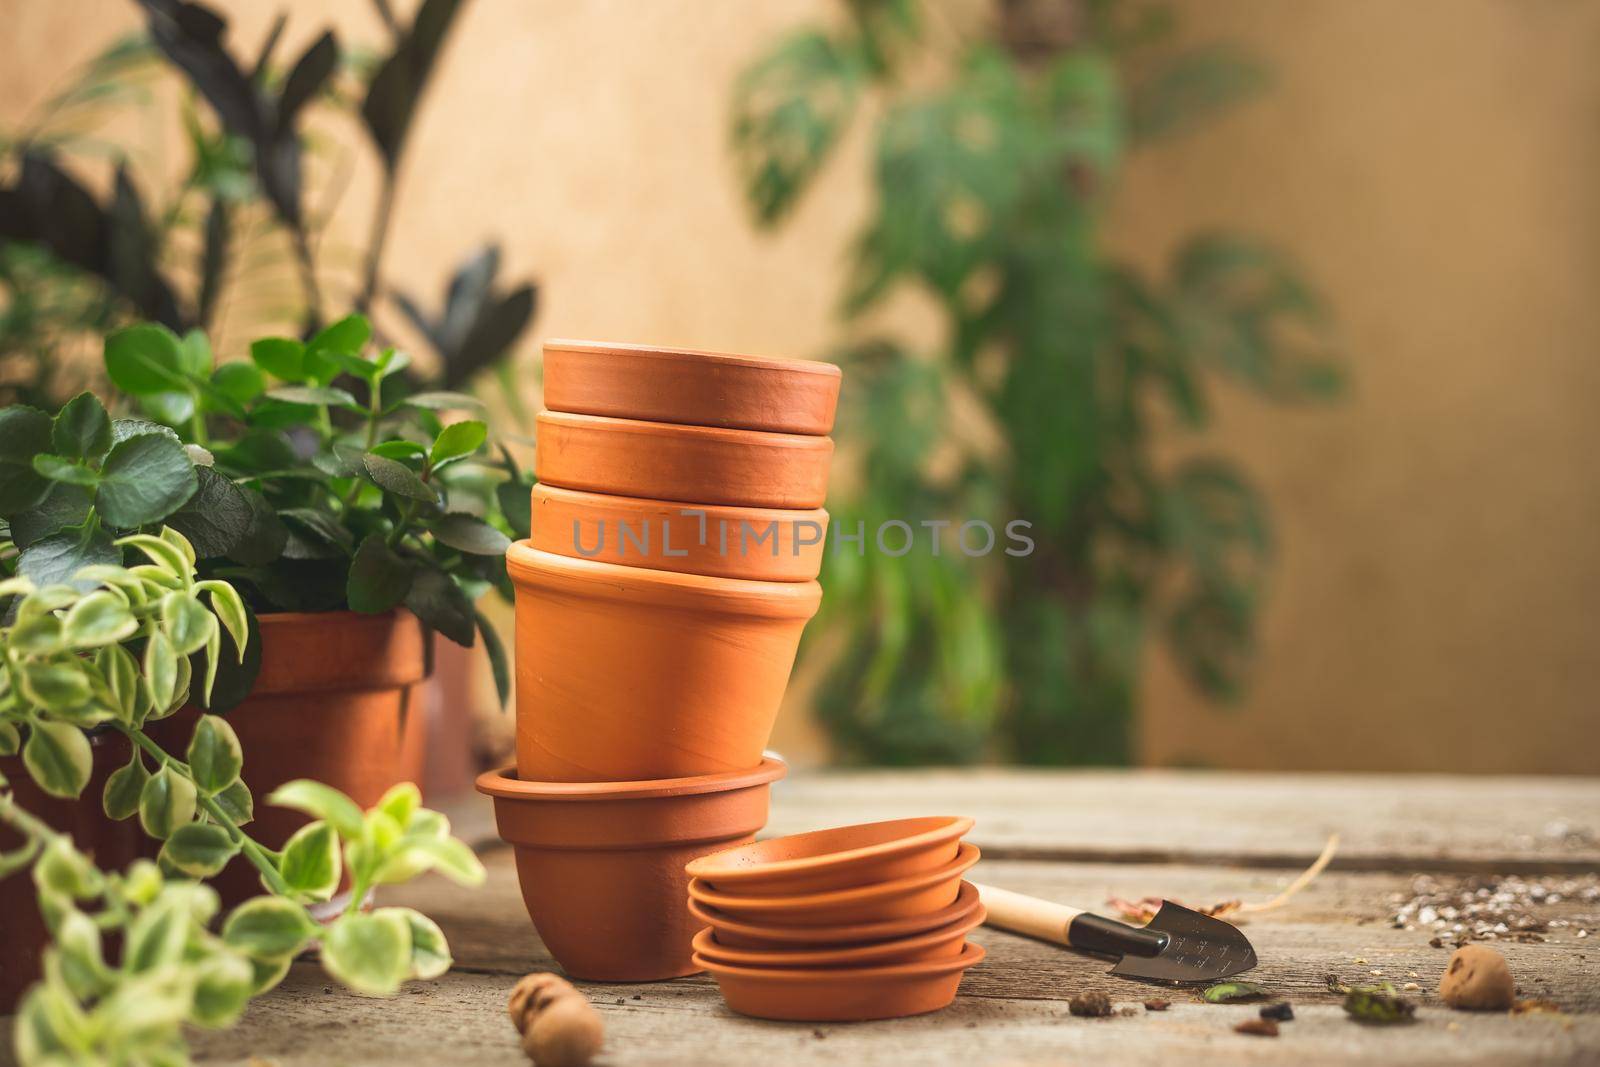 Mini Terra Cotta pots, gardening tools, and plants by Syvanych